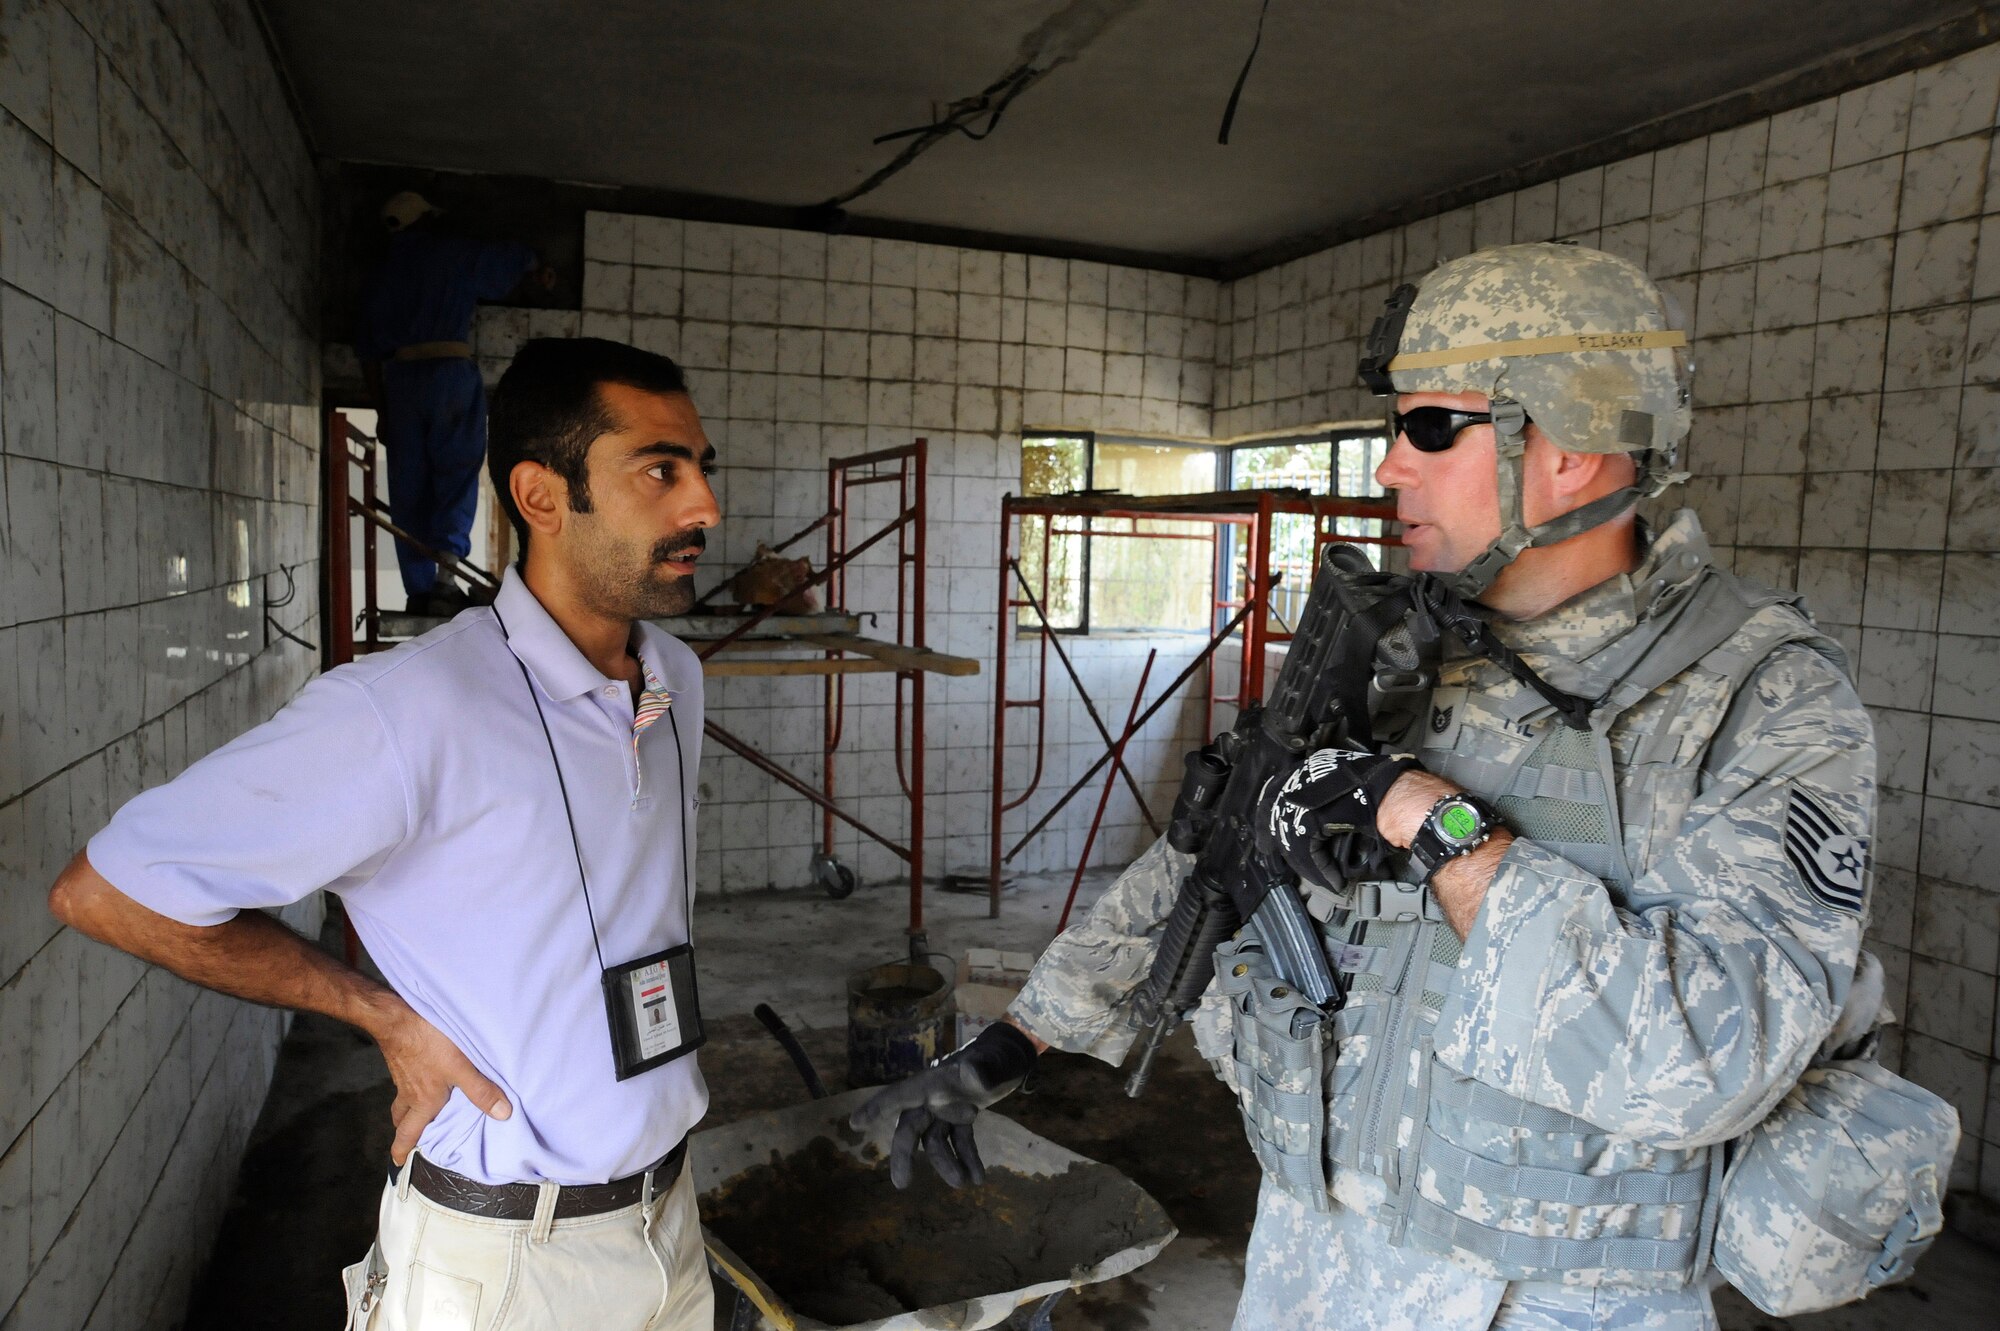 HAWR RAJAB, IRAQ -- U.S. Air Force Tech. Sgt. Jason Filasky, right, contracting representative with the 557th Expeditionary RED HORSE squadron, talks with a contractor about the tile being used for a battled damaged home in the city of Hawr Rajab, Iraq on Aug. 27. Filasky, a Middletown, Del. native, is deployed from 823rd RED HORSE squadron, Tyndall Air Force Base, Fla. (U.S. Air Force photo/Staff Sgt. Paul Villanueva II)